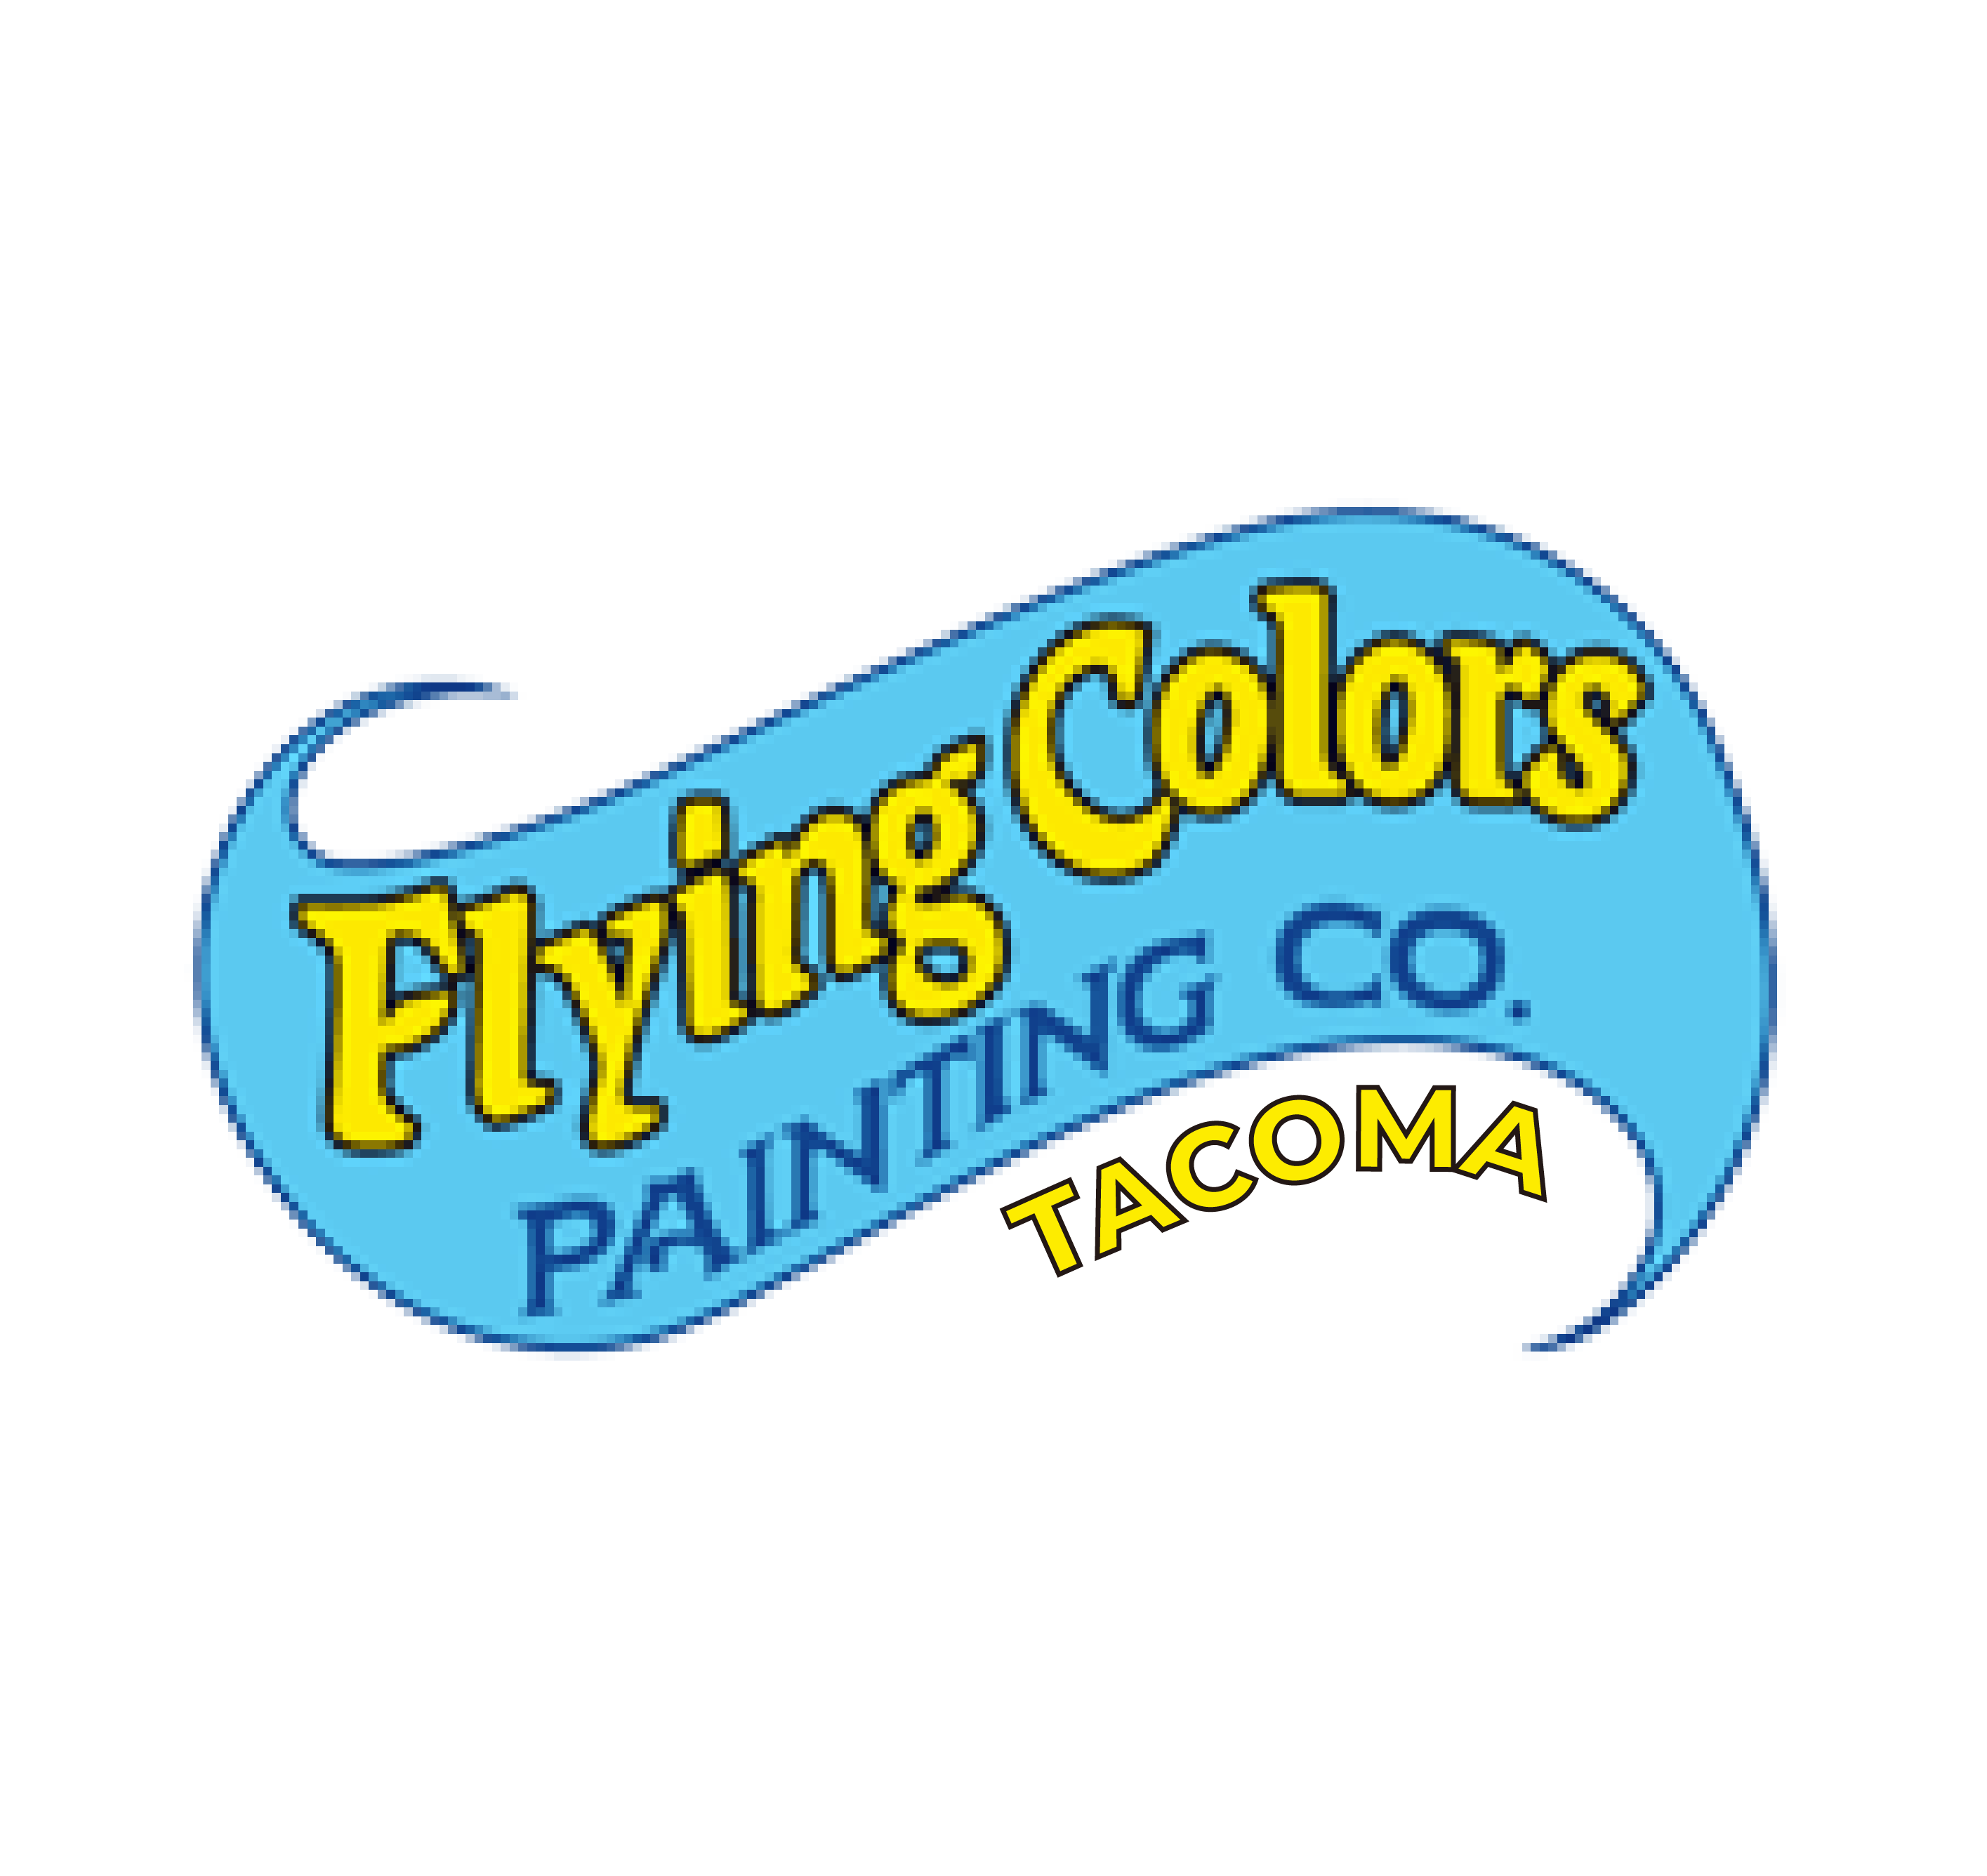 Flying Colors Painting Tacoma